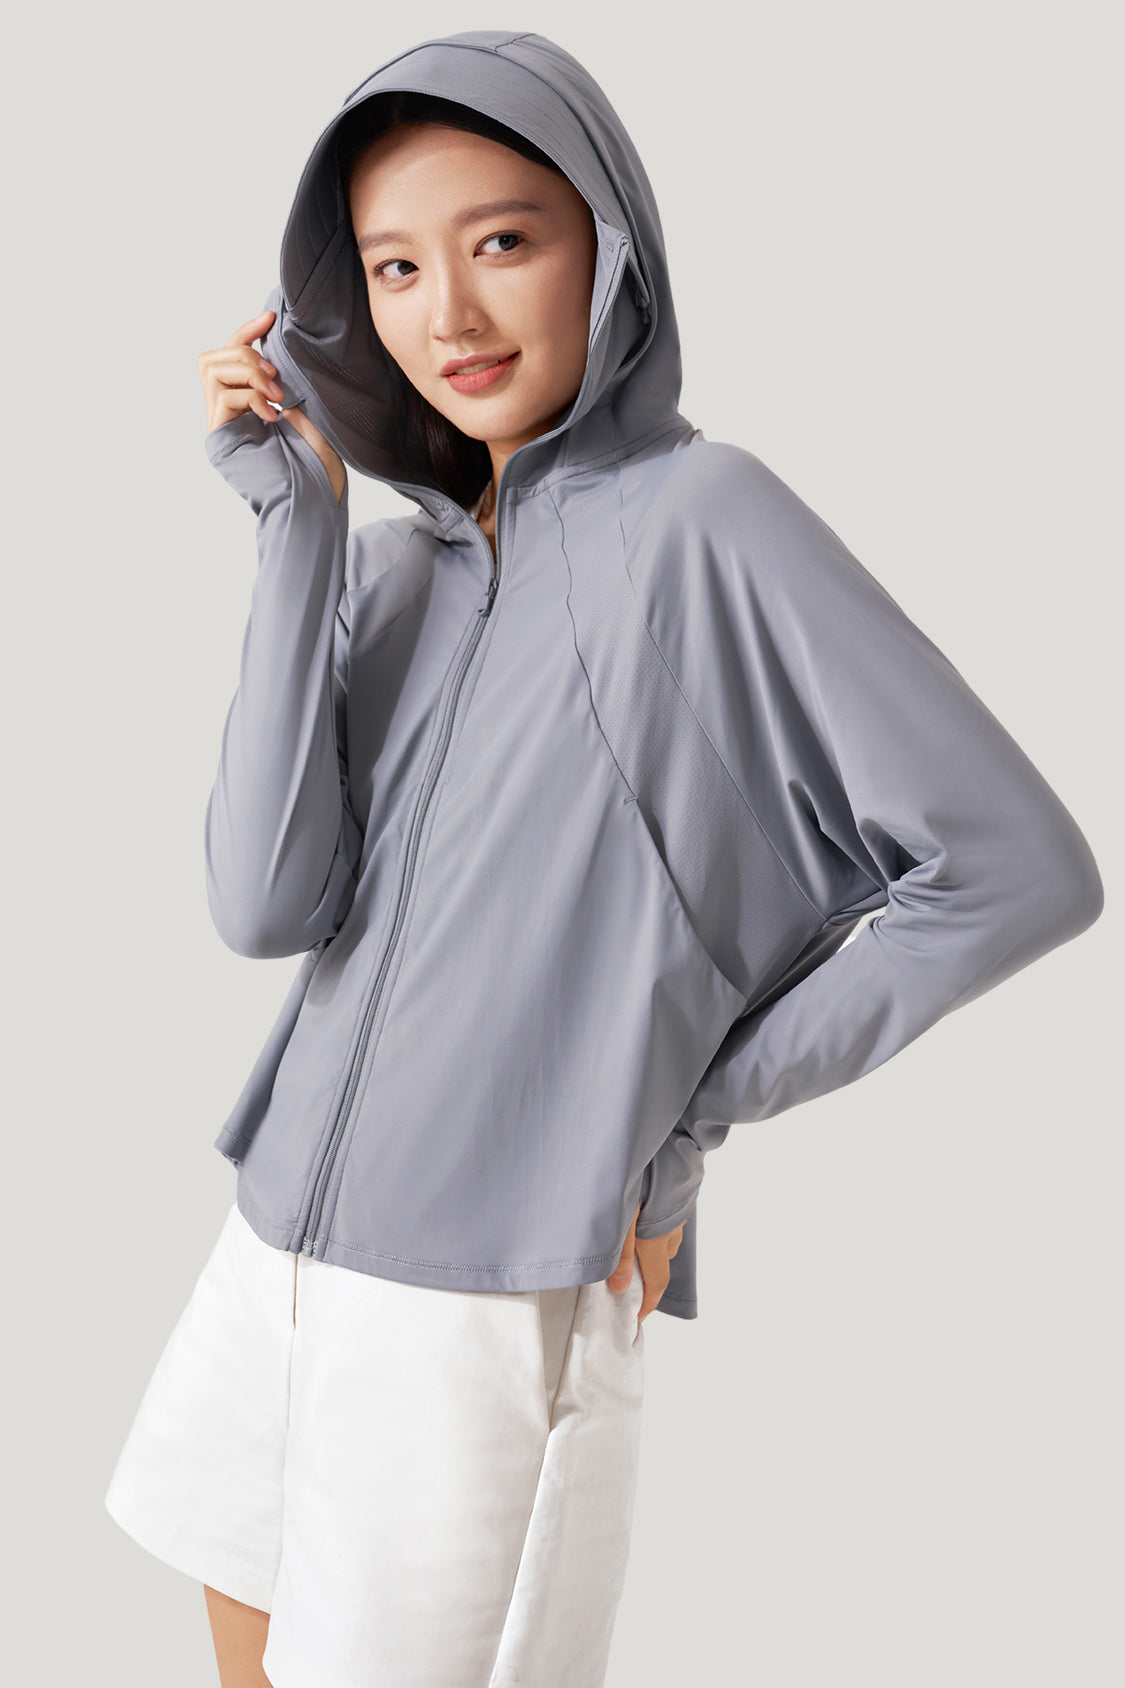 Icey Breath - Women's Cooling Shirt UPF50+